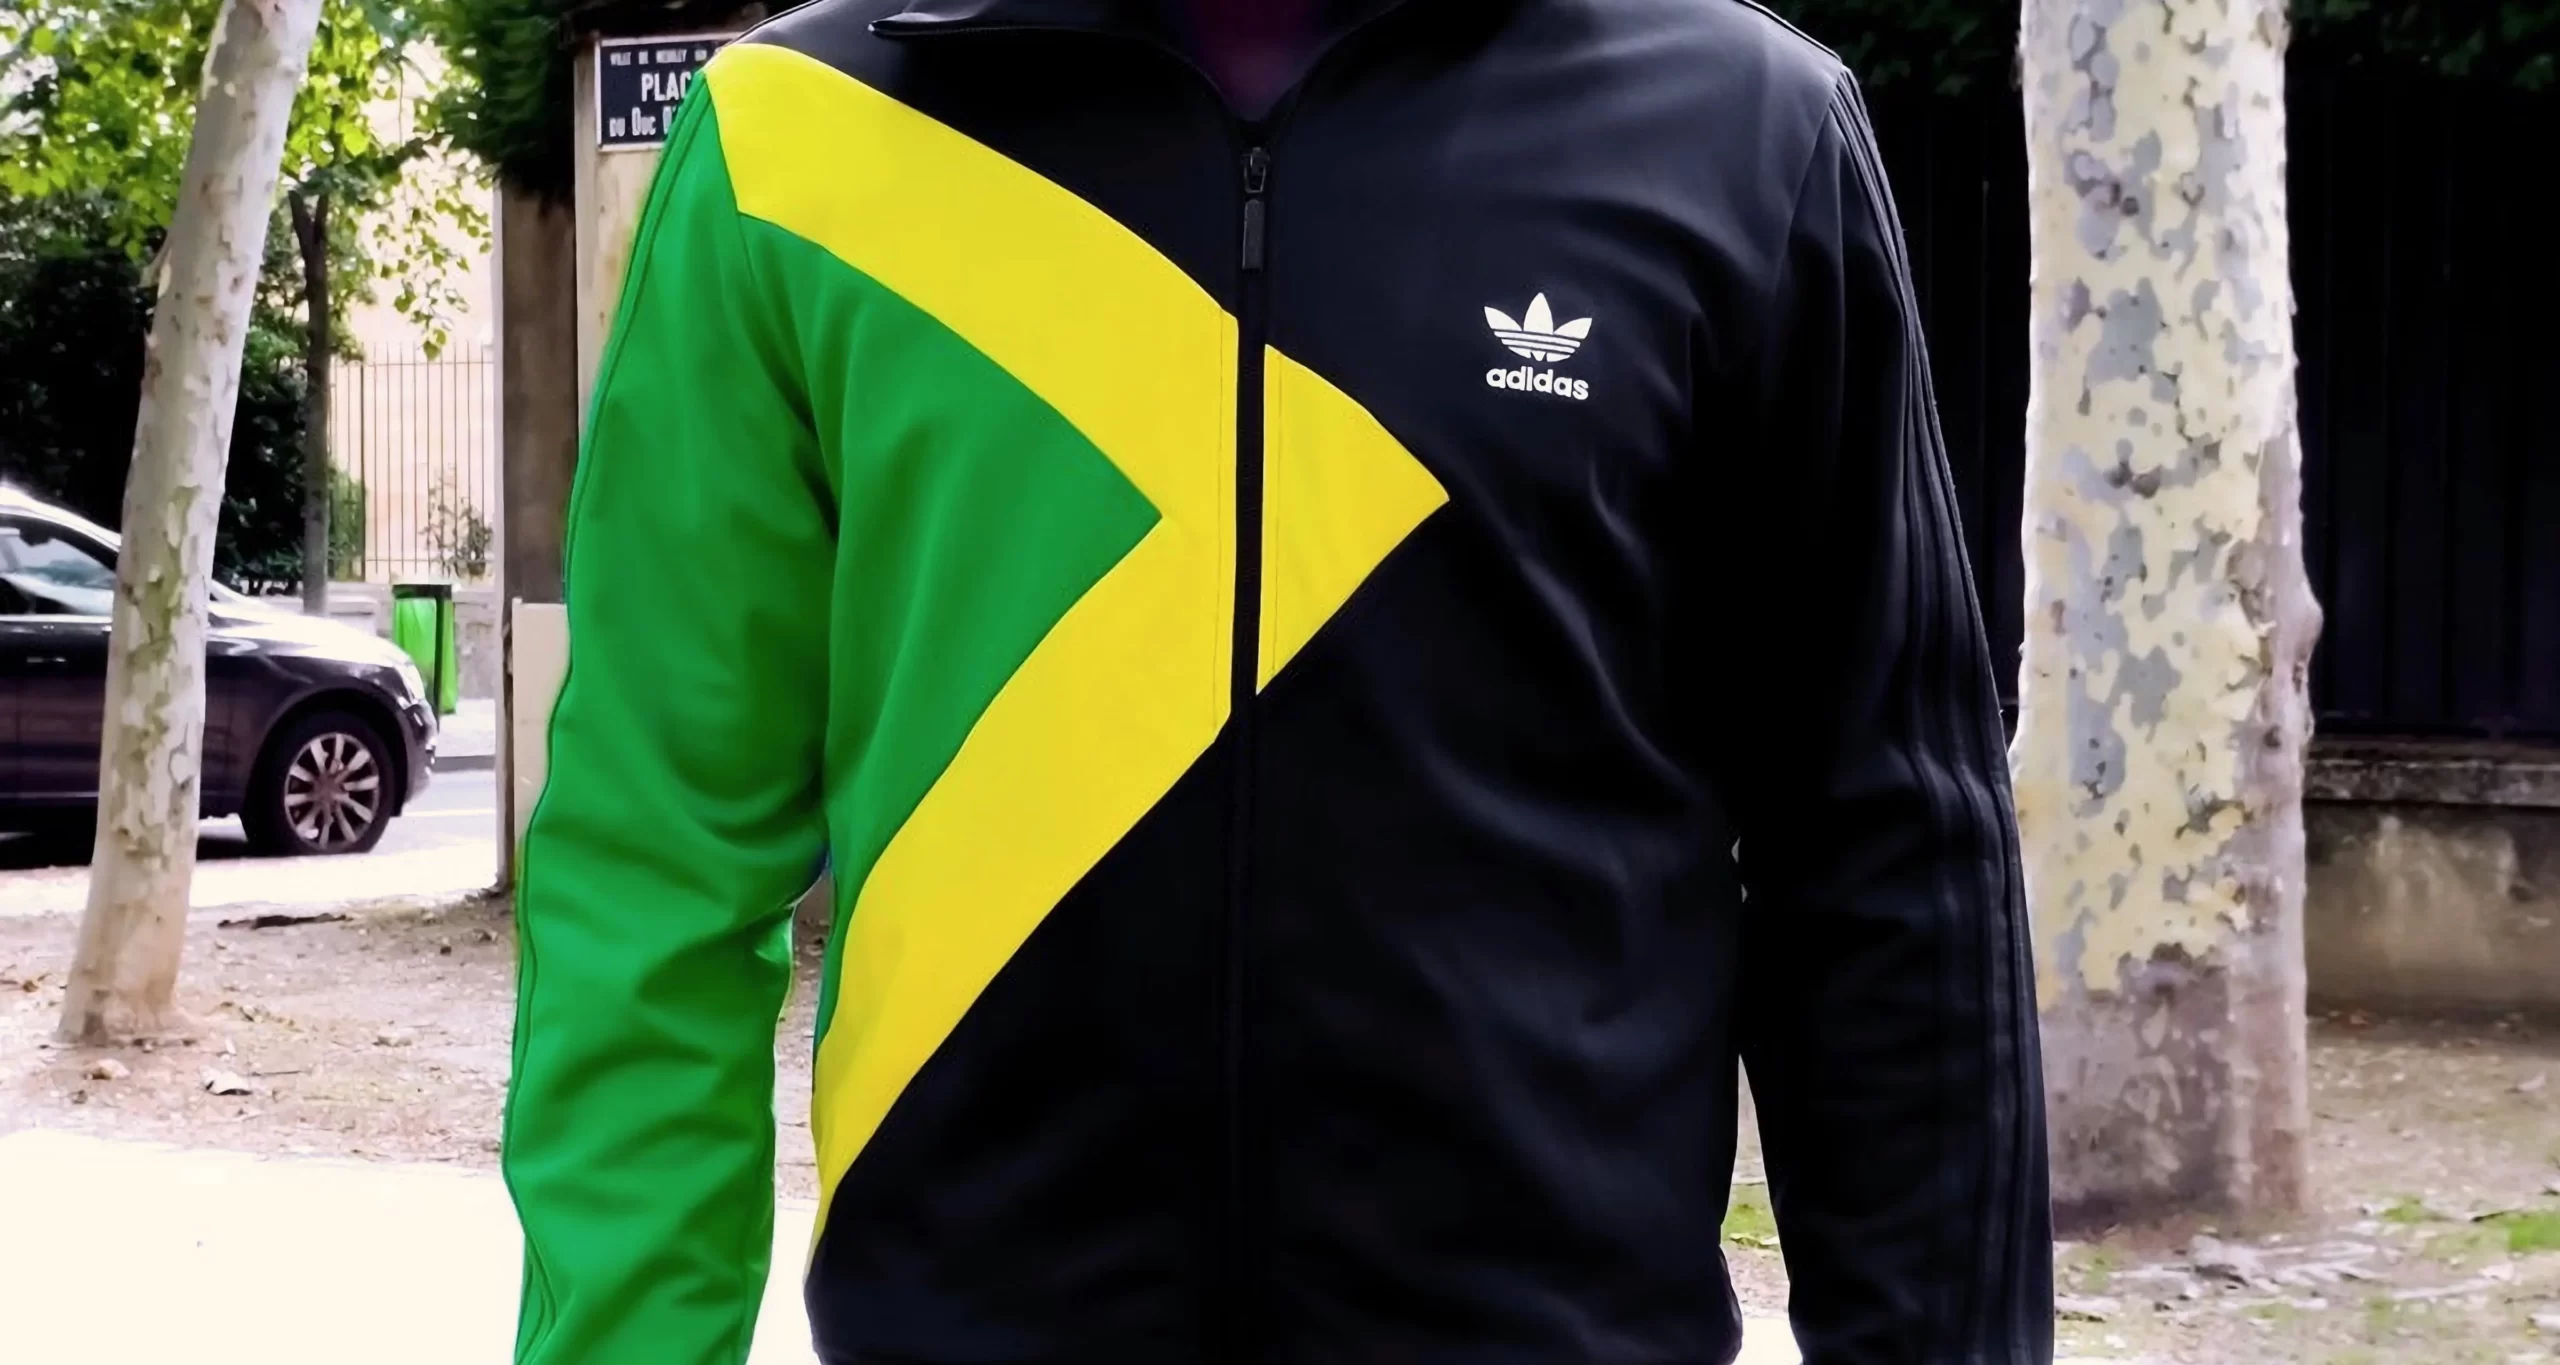 Men’s 2007 Cool Runnings Movie Track Top by Adidas: Recognized (EnLawded.com file #lmch98zxaa0pbzwzql)